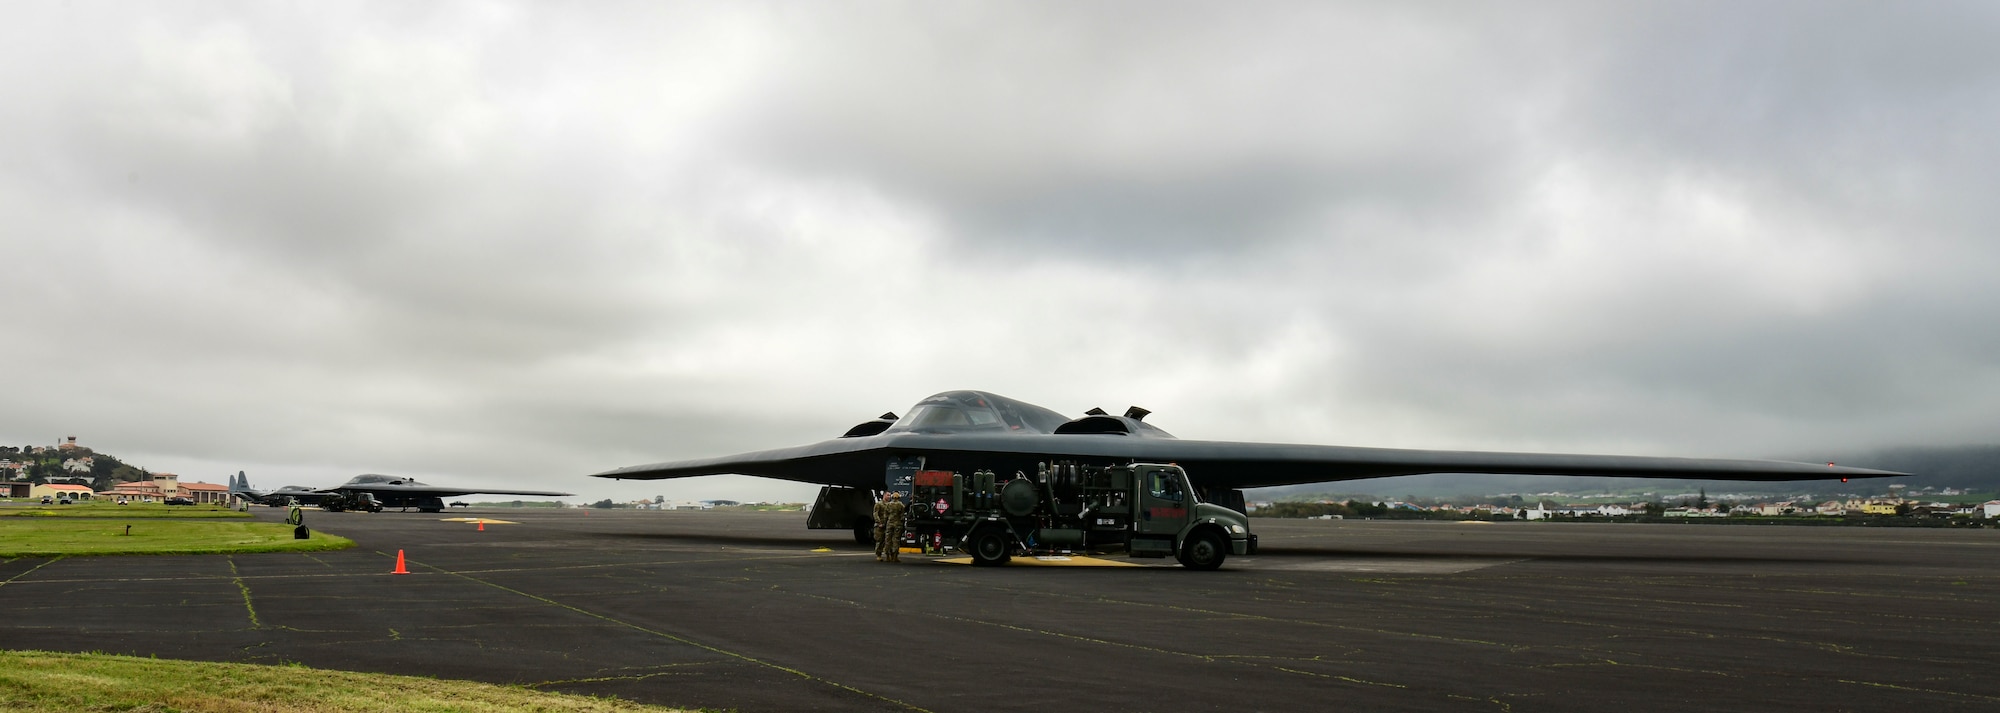 The B-2’s deployment to Lajes Field provides a staging point allowing commanders to confront a broad range of global challenges in support of the National Defense Strategy, through the employment of a multi-role bomber.